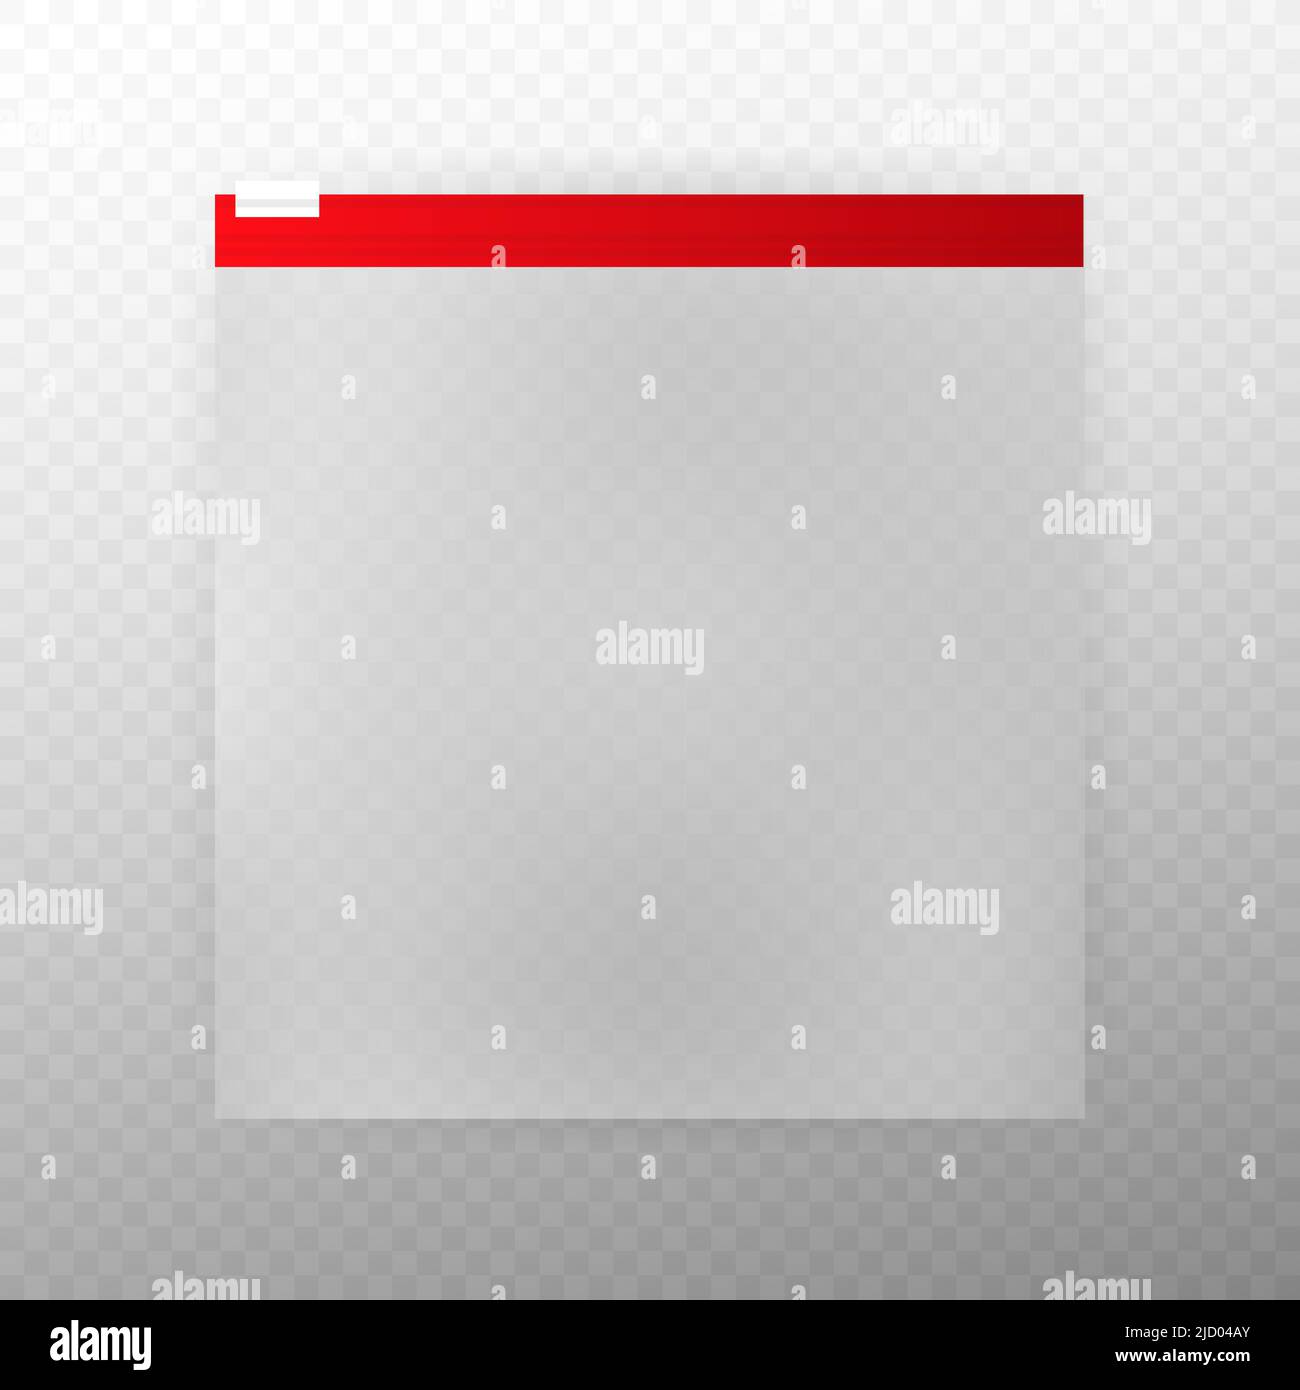 Realistic red plastic bags on zippers. Vector illustration. Stock Vector